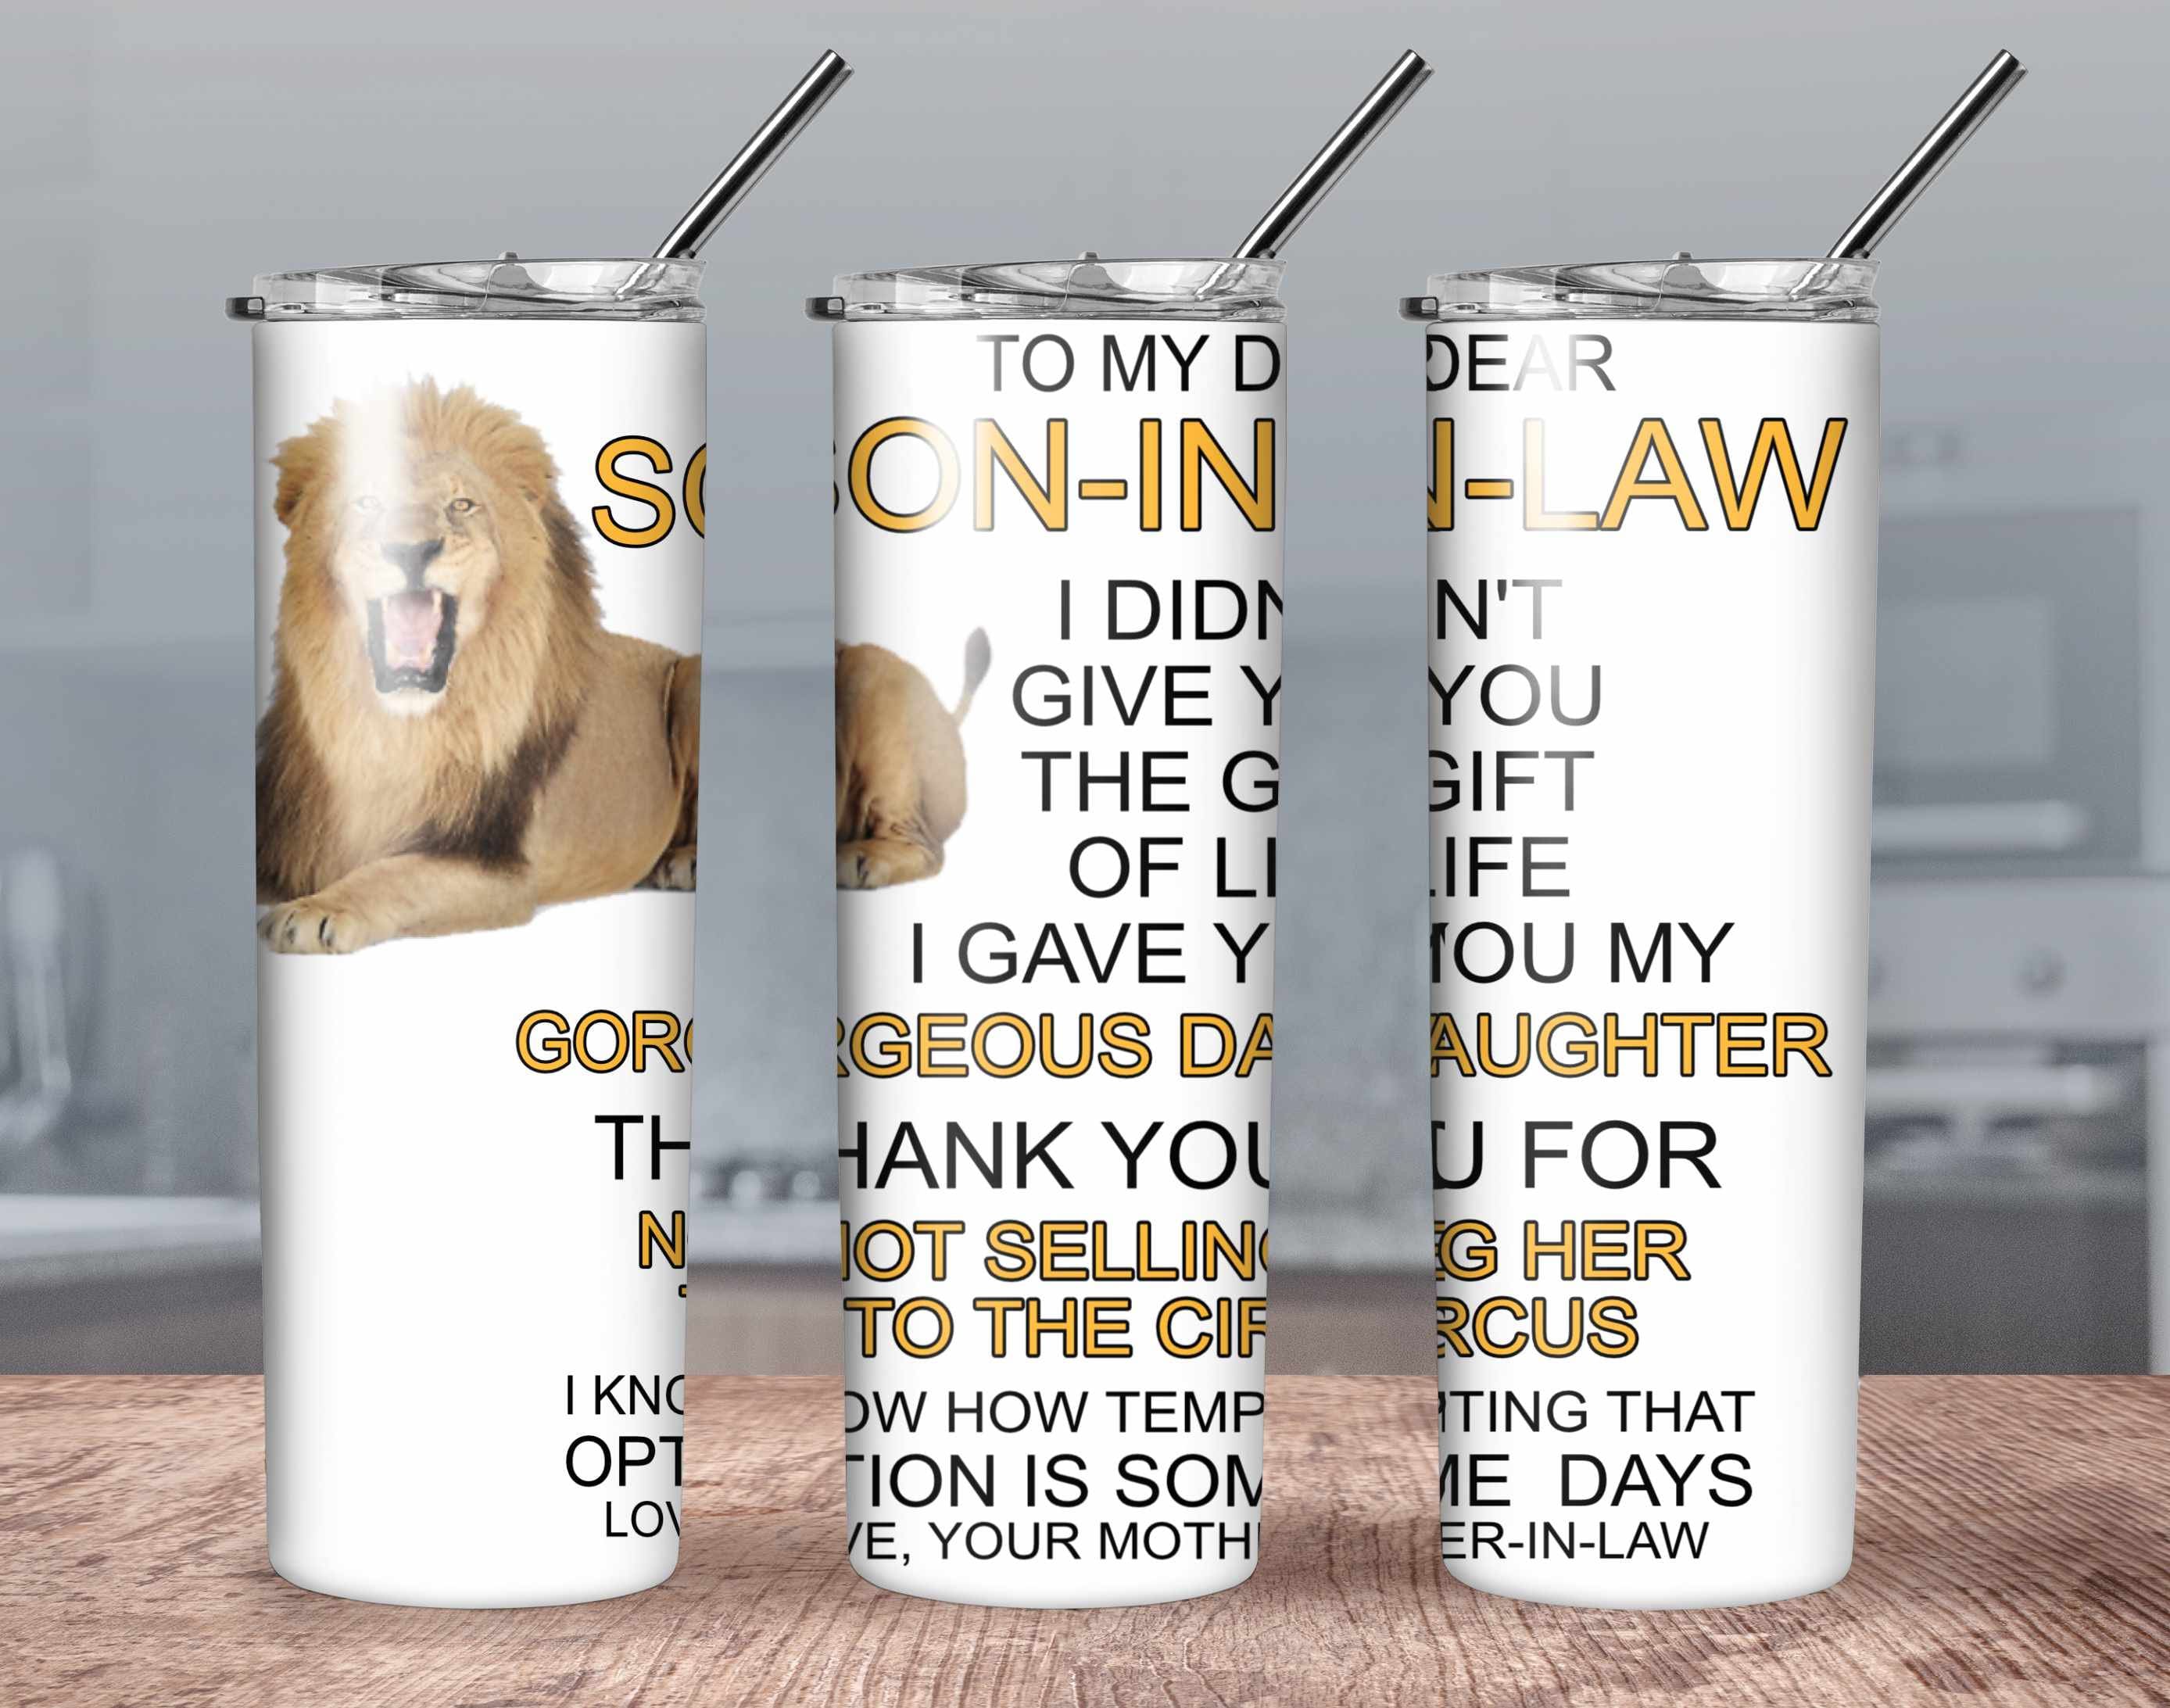 Muilzon Son-in-Law Gifts Tumblers 20oz - Son-in-Law Gifts from  Mother in Law/Father in Law Coffee Mug - Gifts for Son-in-Law Cup -  Birthday Gift Ideas for Son-in-Laws: Tumblers & Water